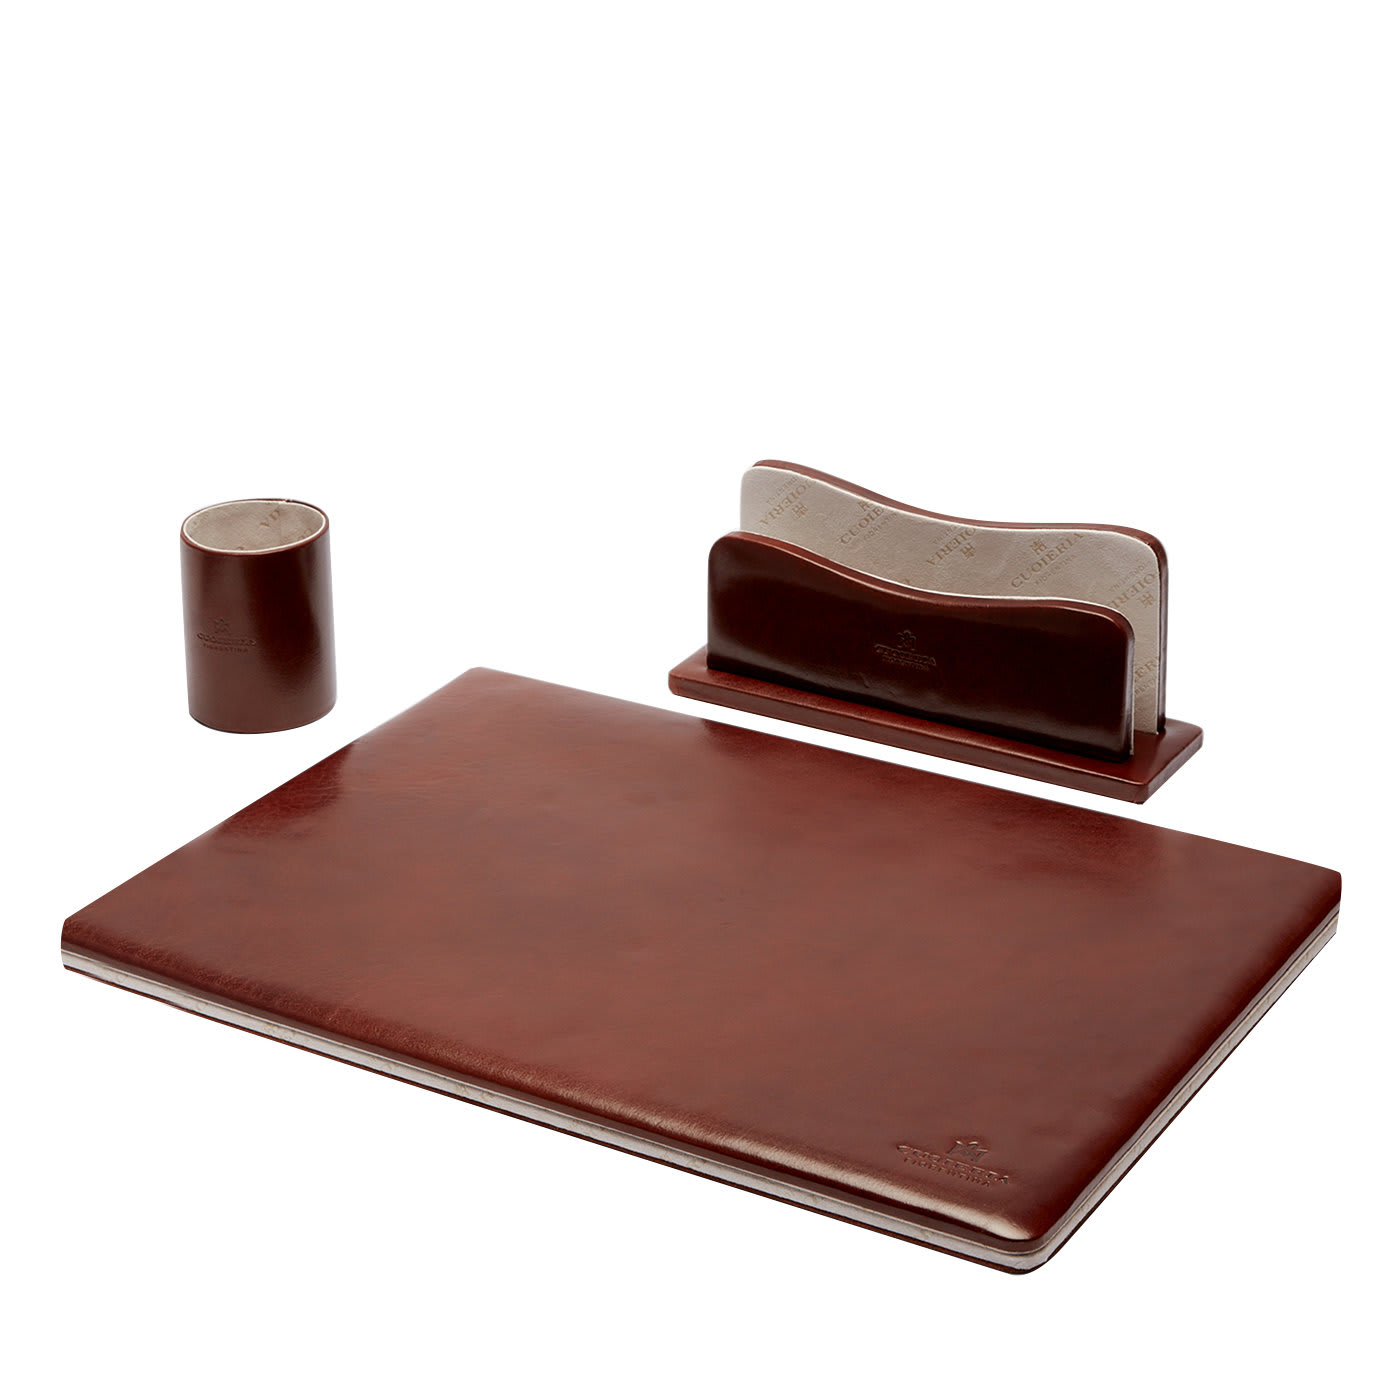 Warm & Color Brown Set of Desk Pad, Pen and Letter Holder - Cuoieria Fiorentina